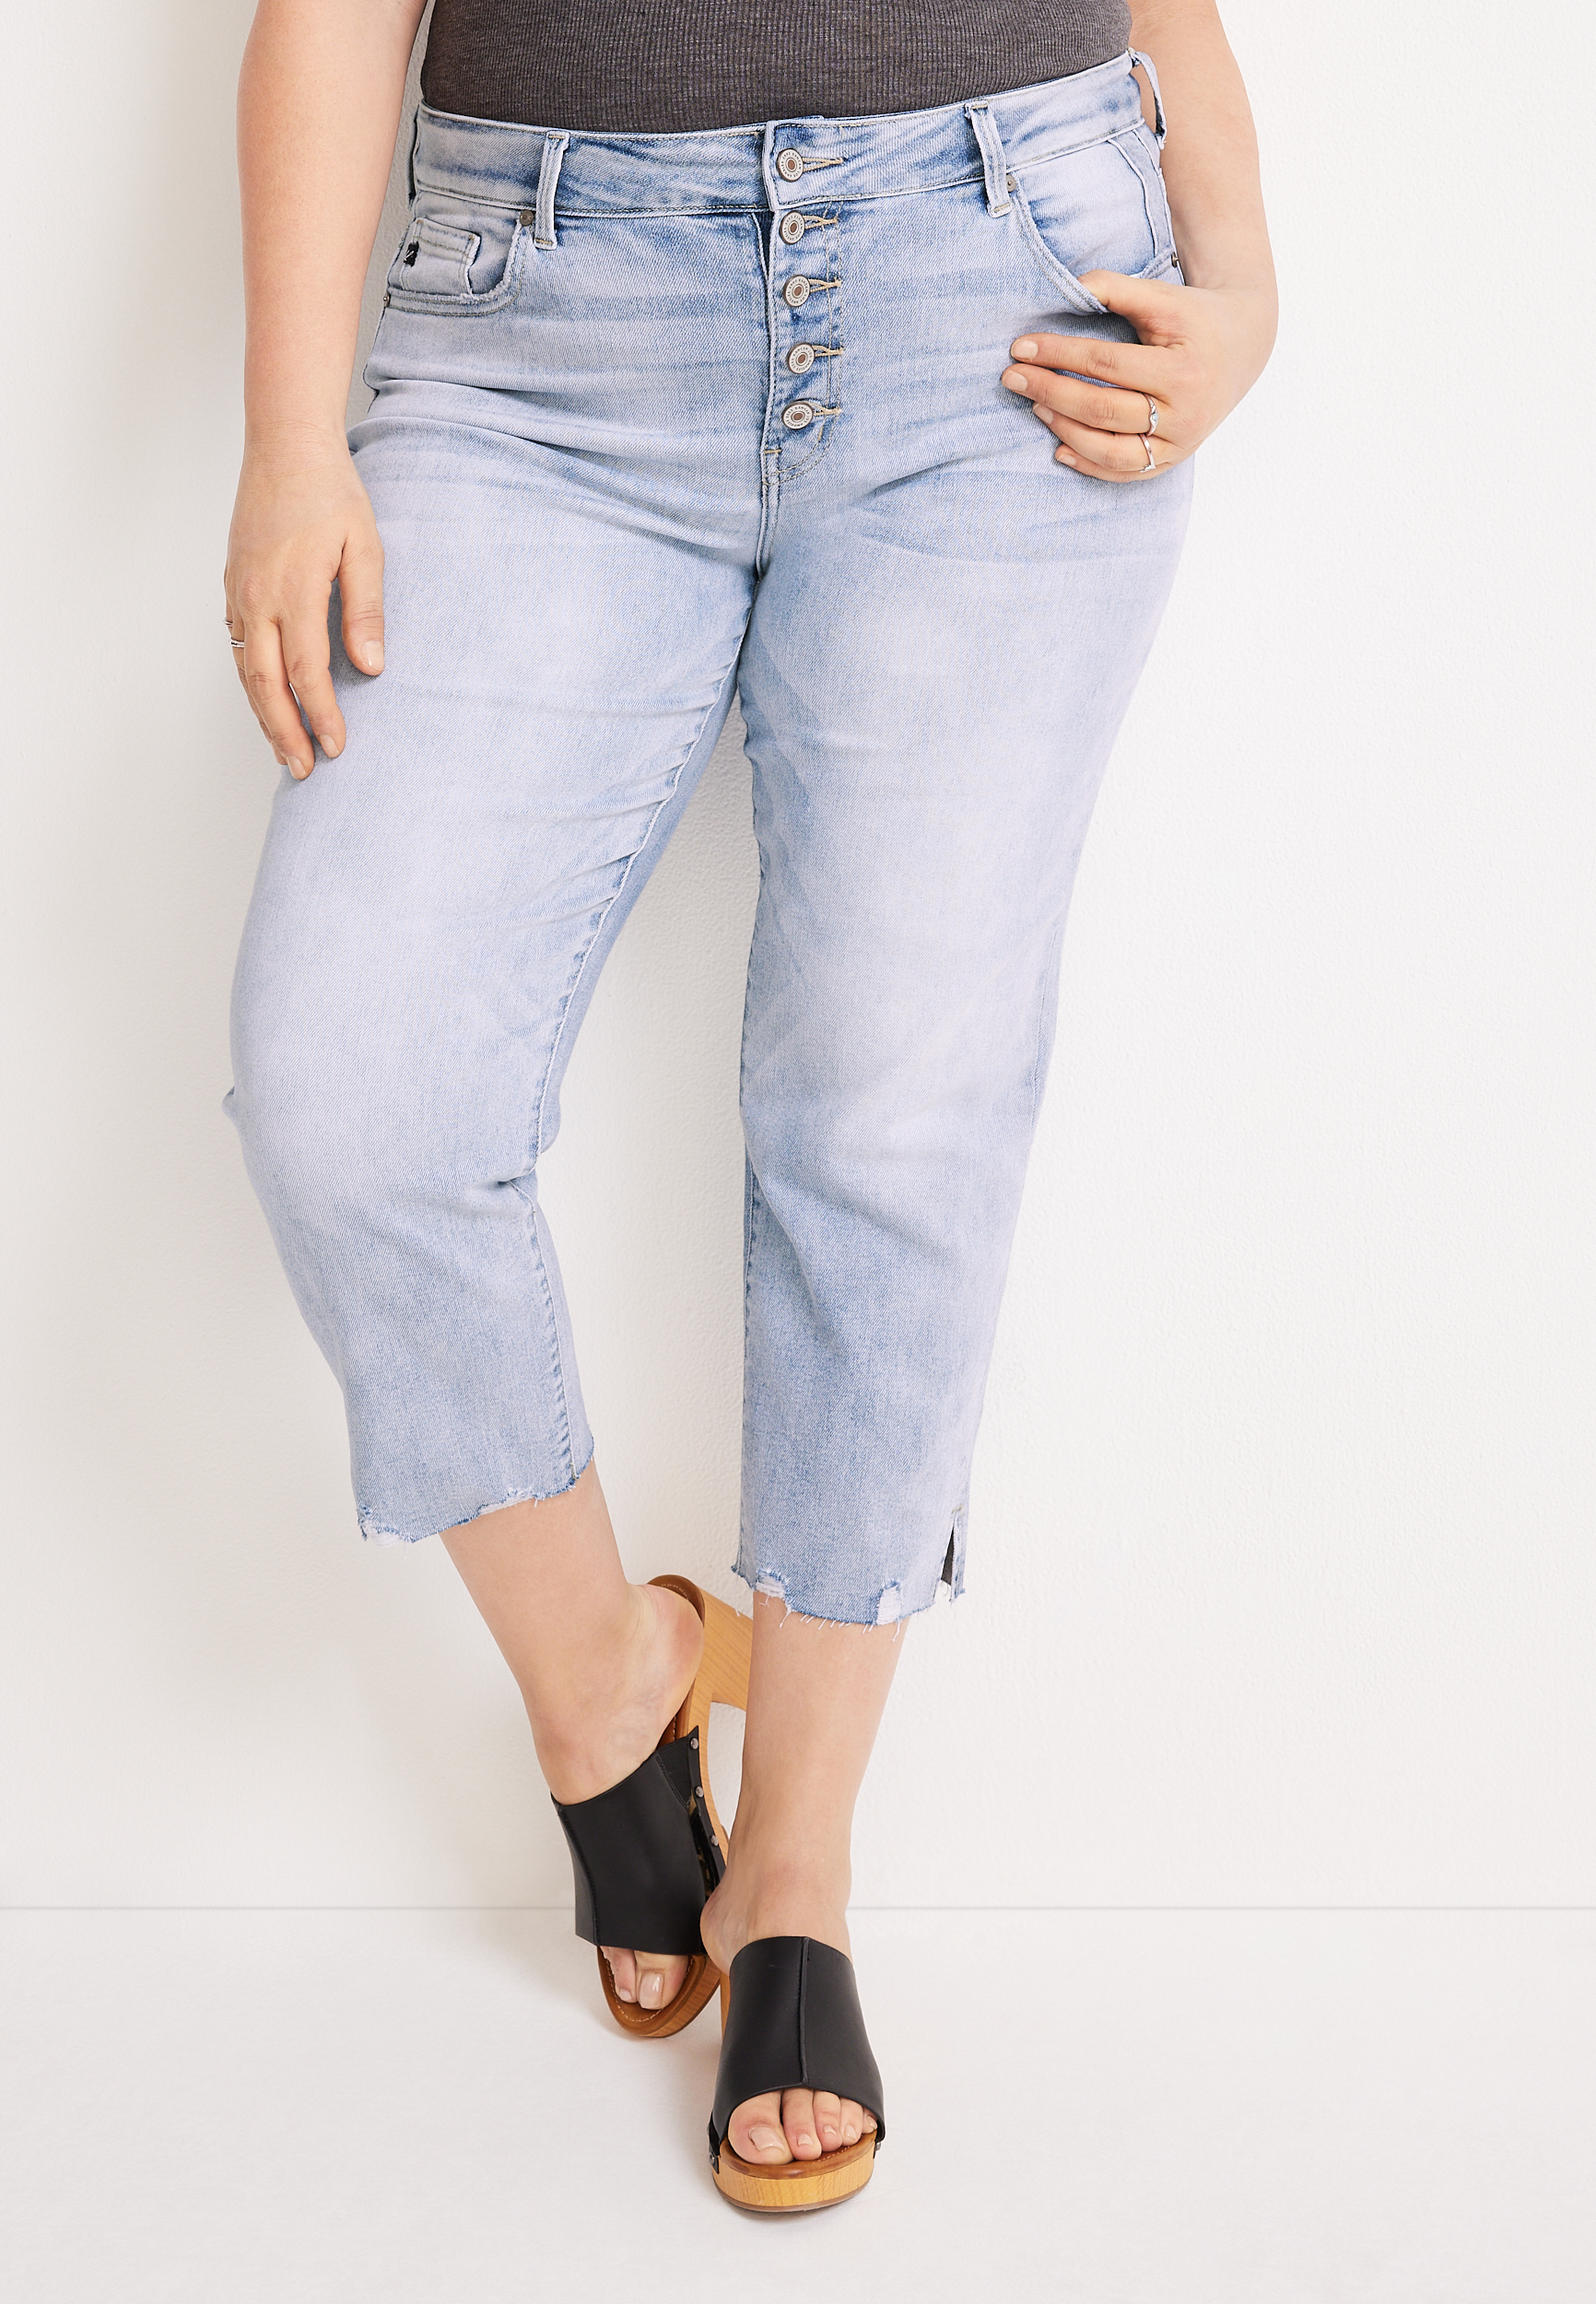 Plus Size KanCan™ High Rise Button Fly Cropped Jean | maurices